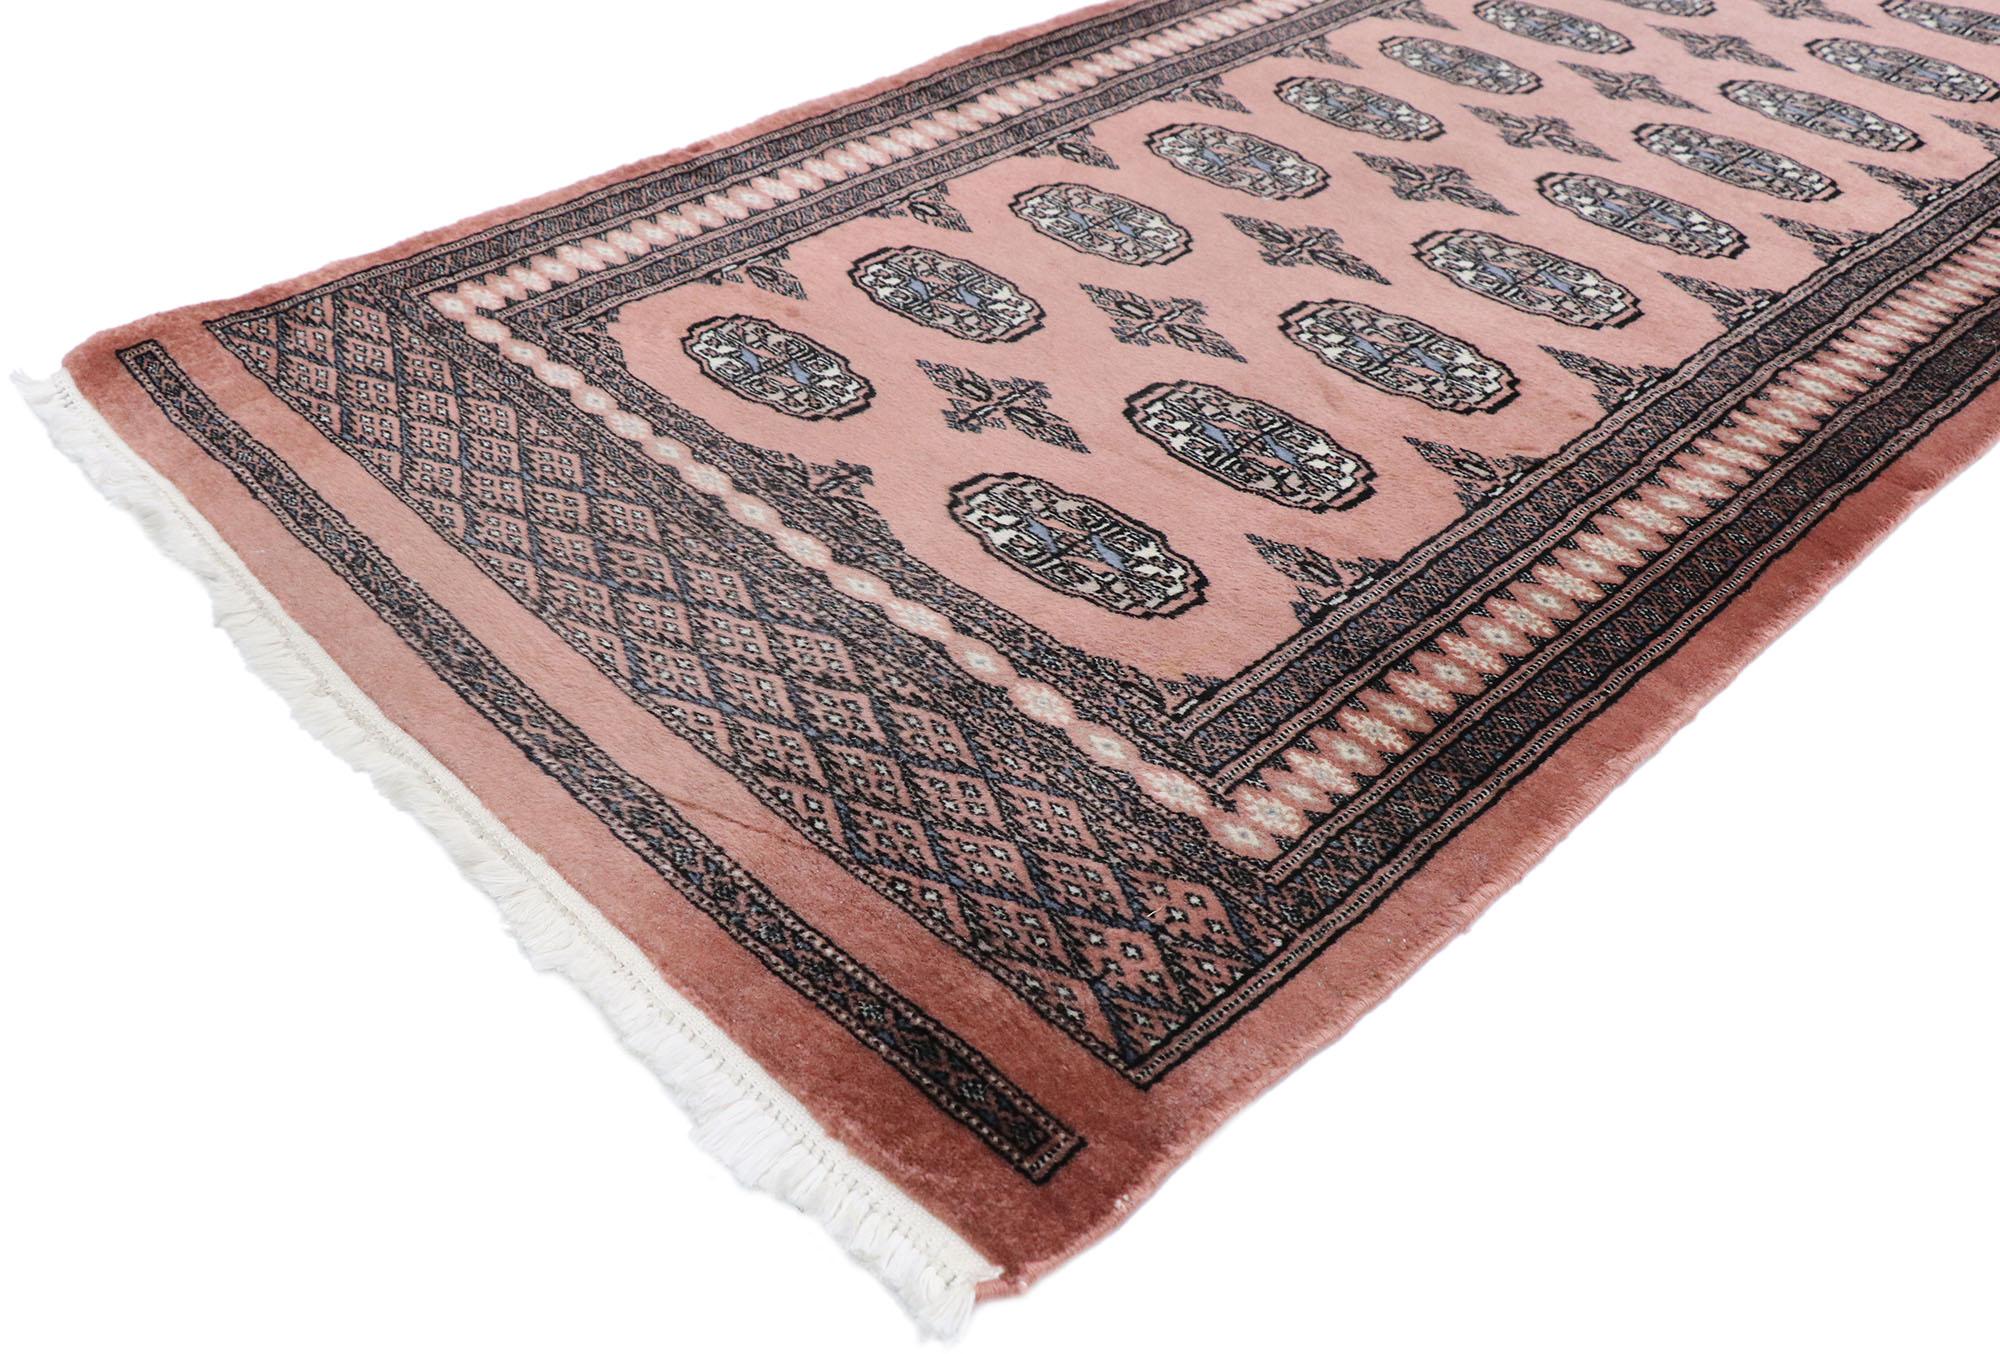 77798 vintage Pakistani Jaldar Bokhara Runner with Southwest Boho Chic style 02'08 x 17'09. Effortless beauty and simplicity meet southwest desert boho style in this hand-knotted wool vintage Pakistani Jaldar Bokhara runner. The abrashed rose pink